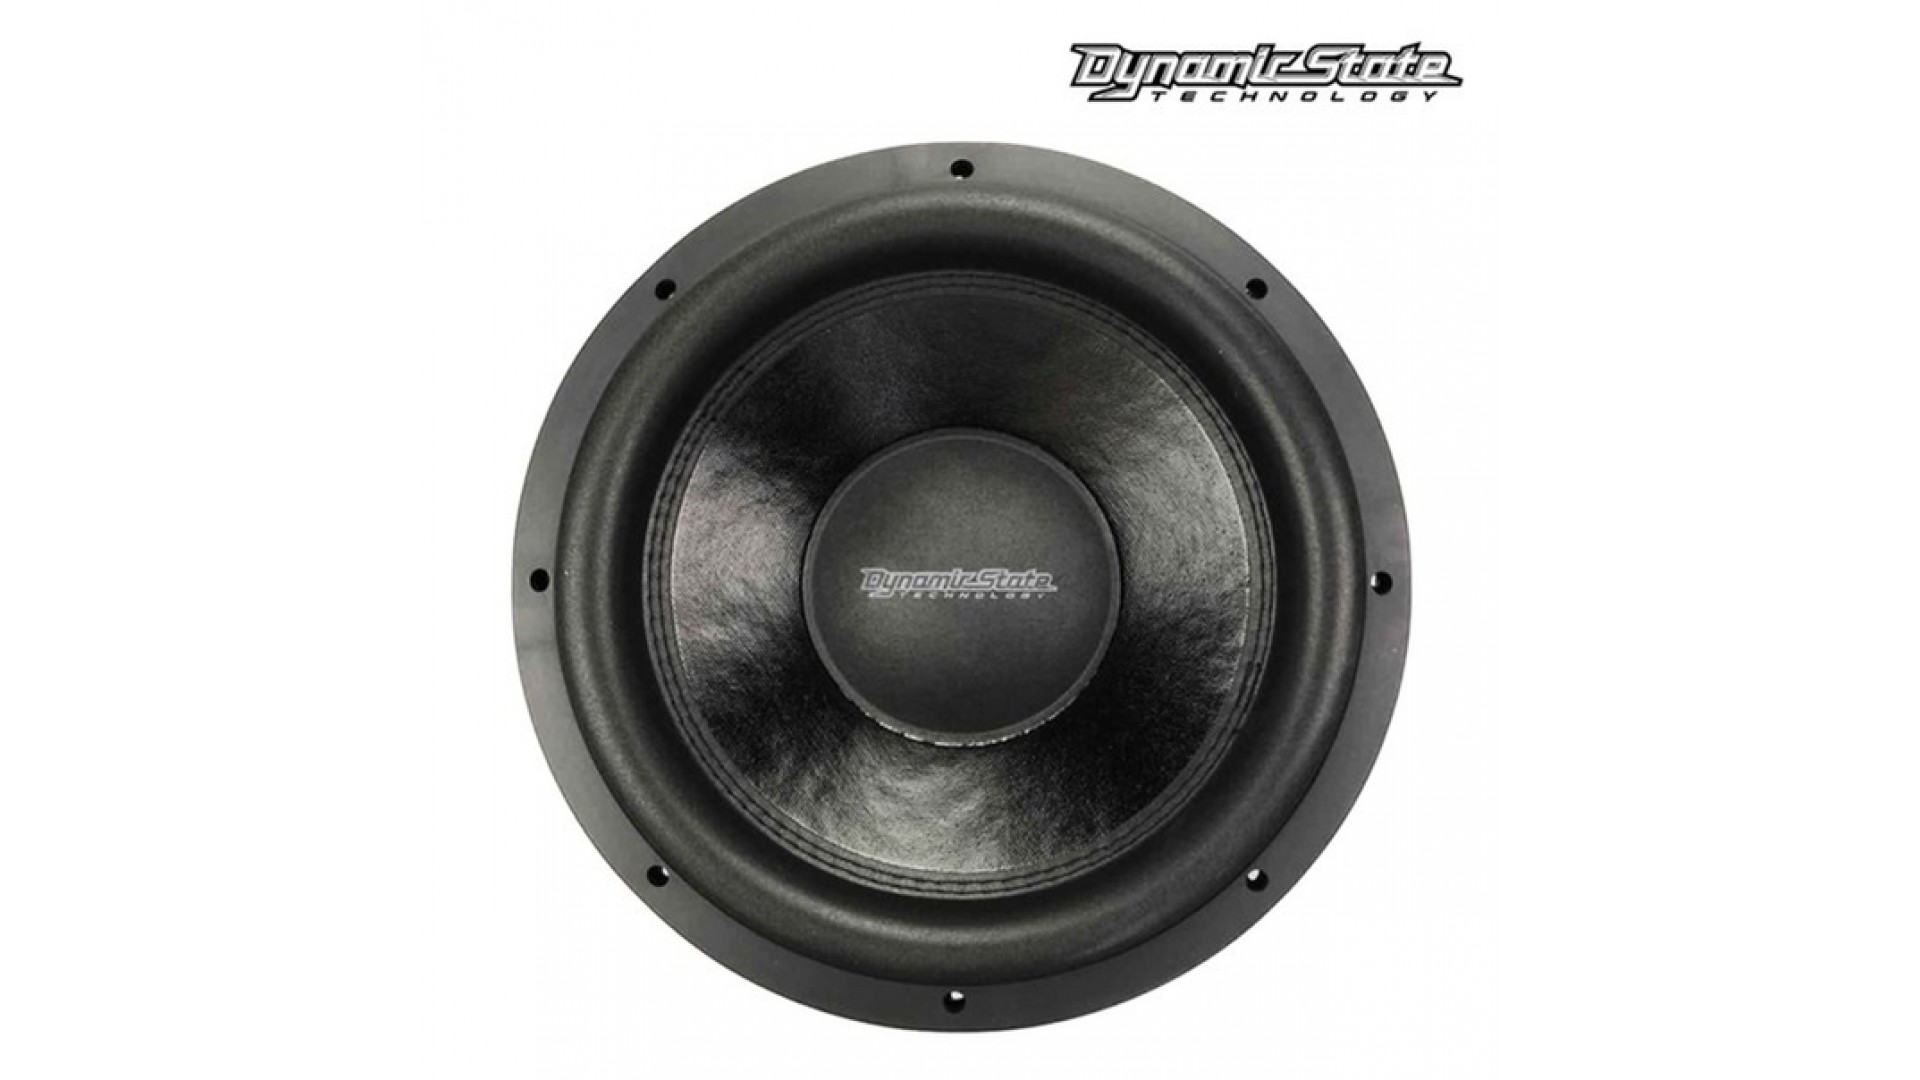 Dynamic State PSW-401 PRO Series